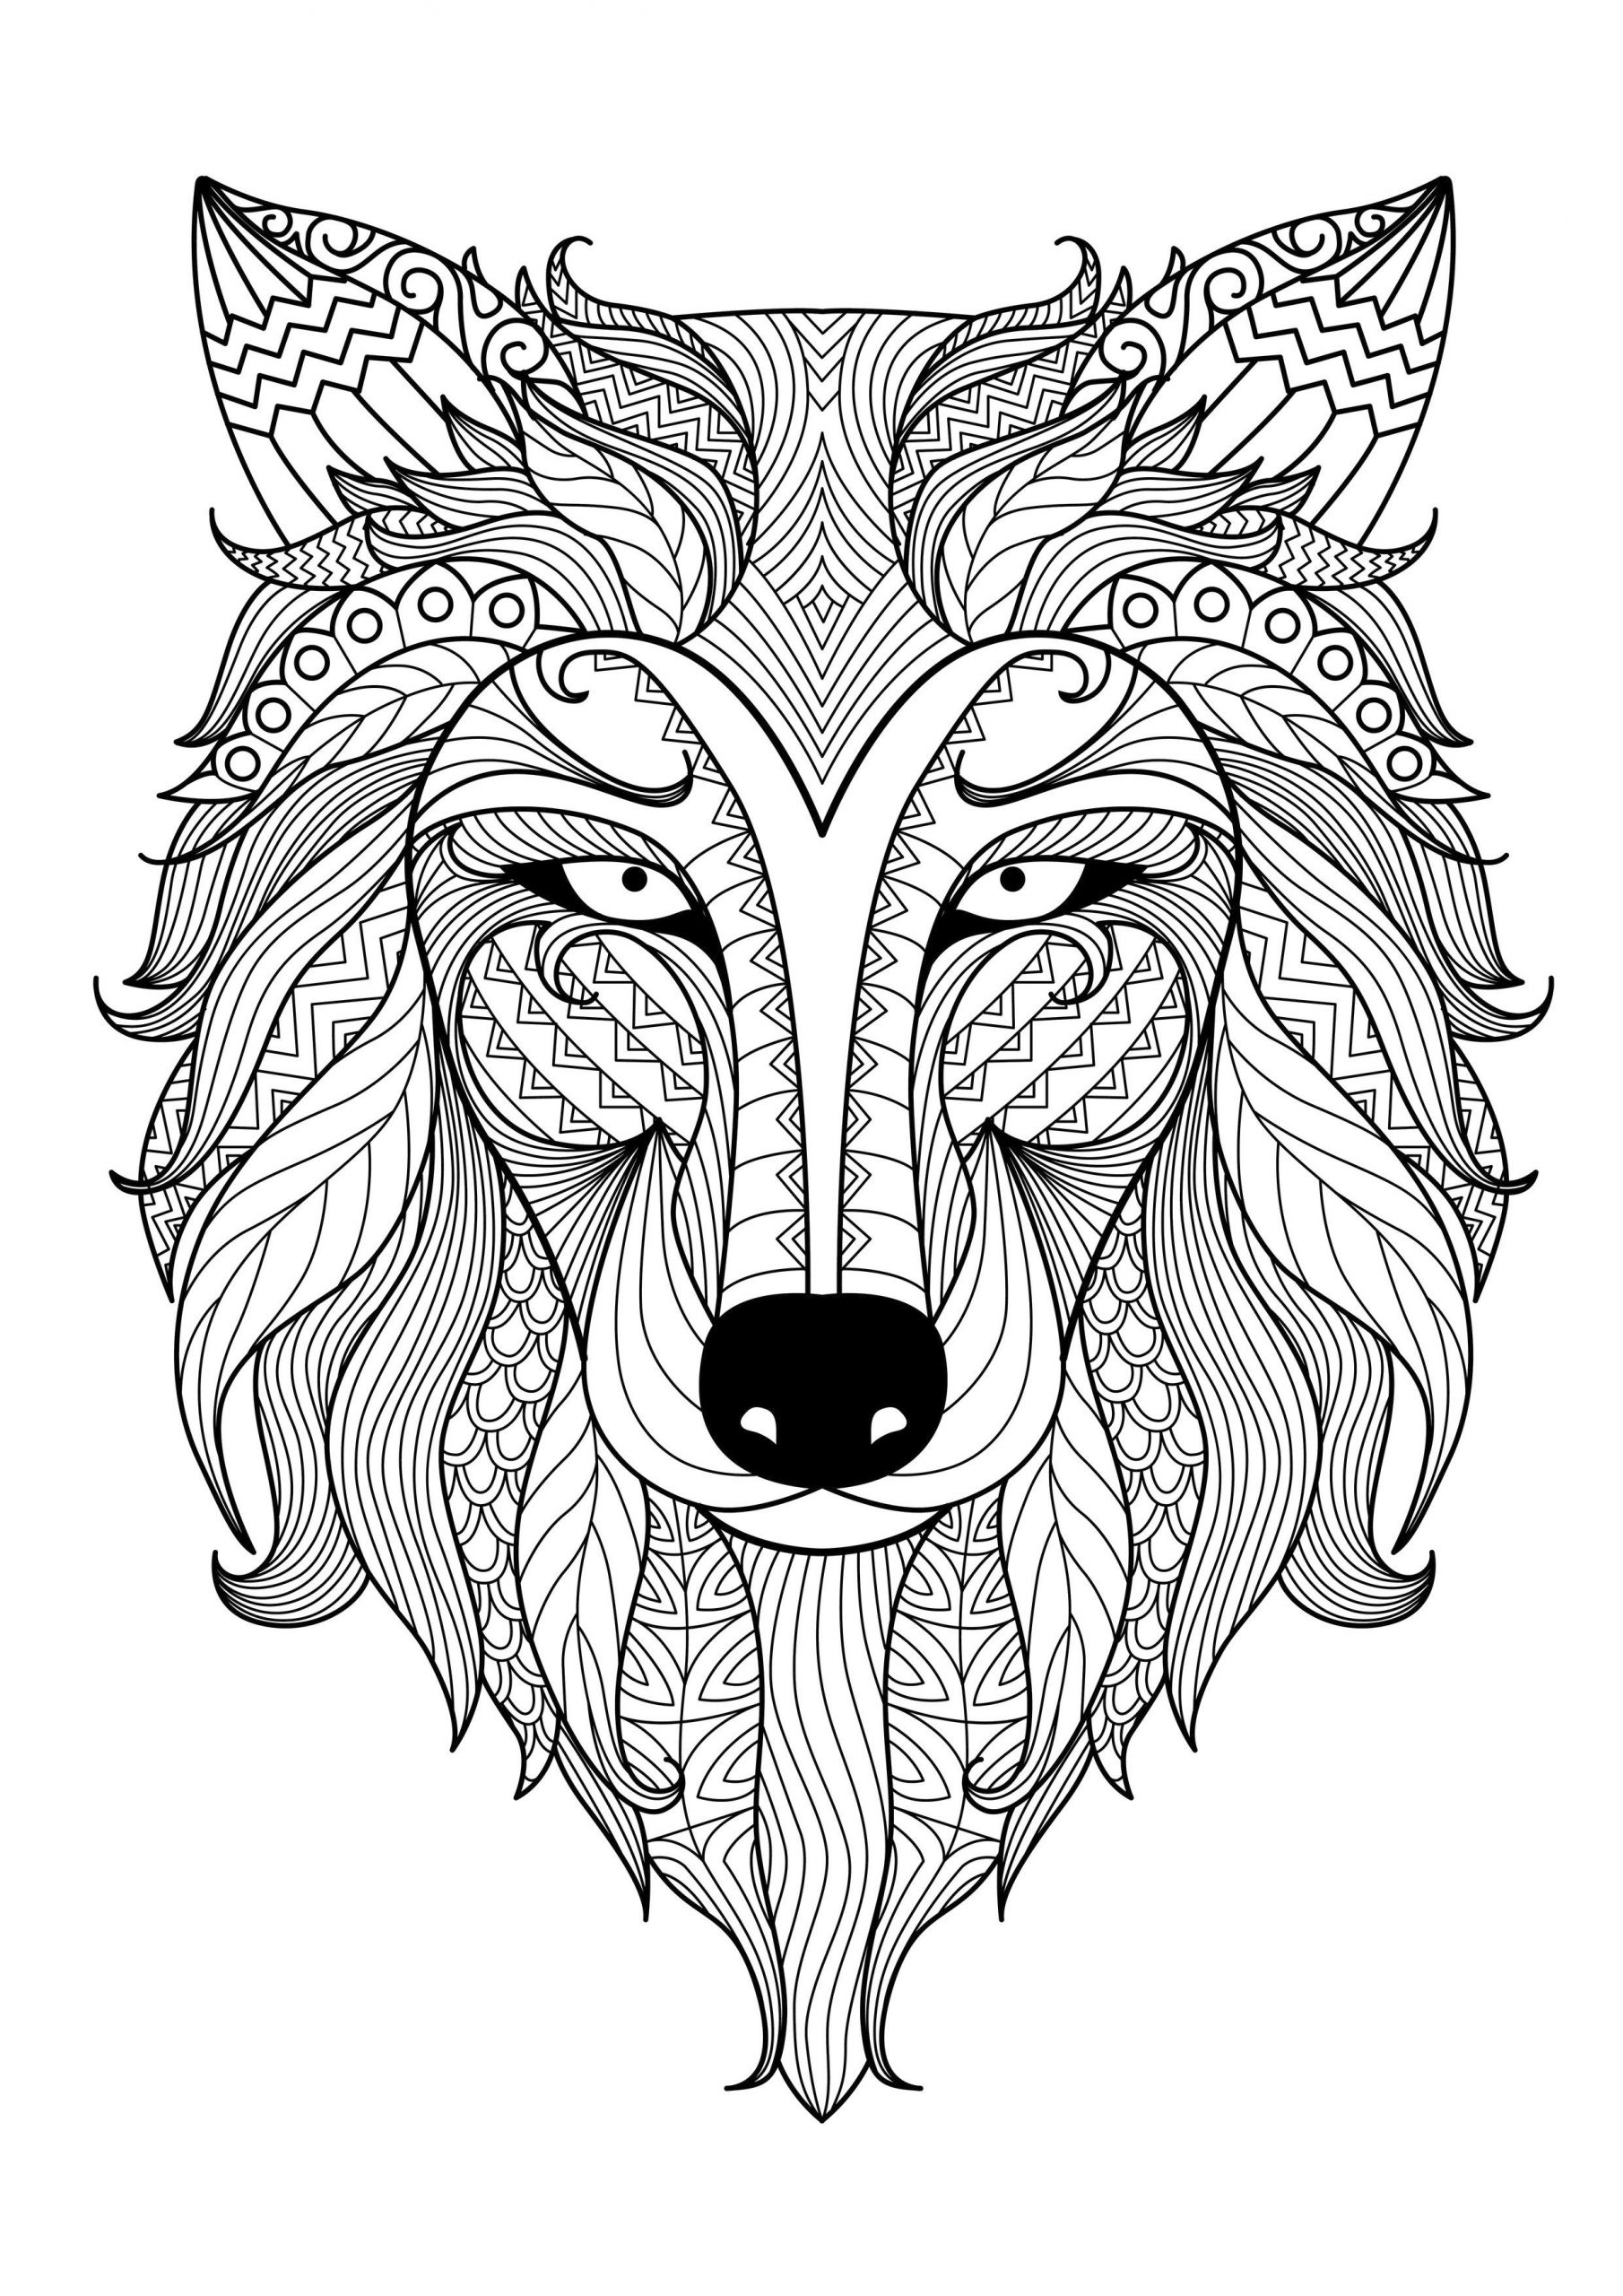 Wolf Coloring Pages For Adults
 Incredible wolf by bimdeedee